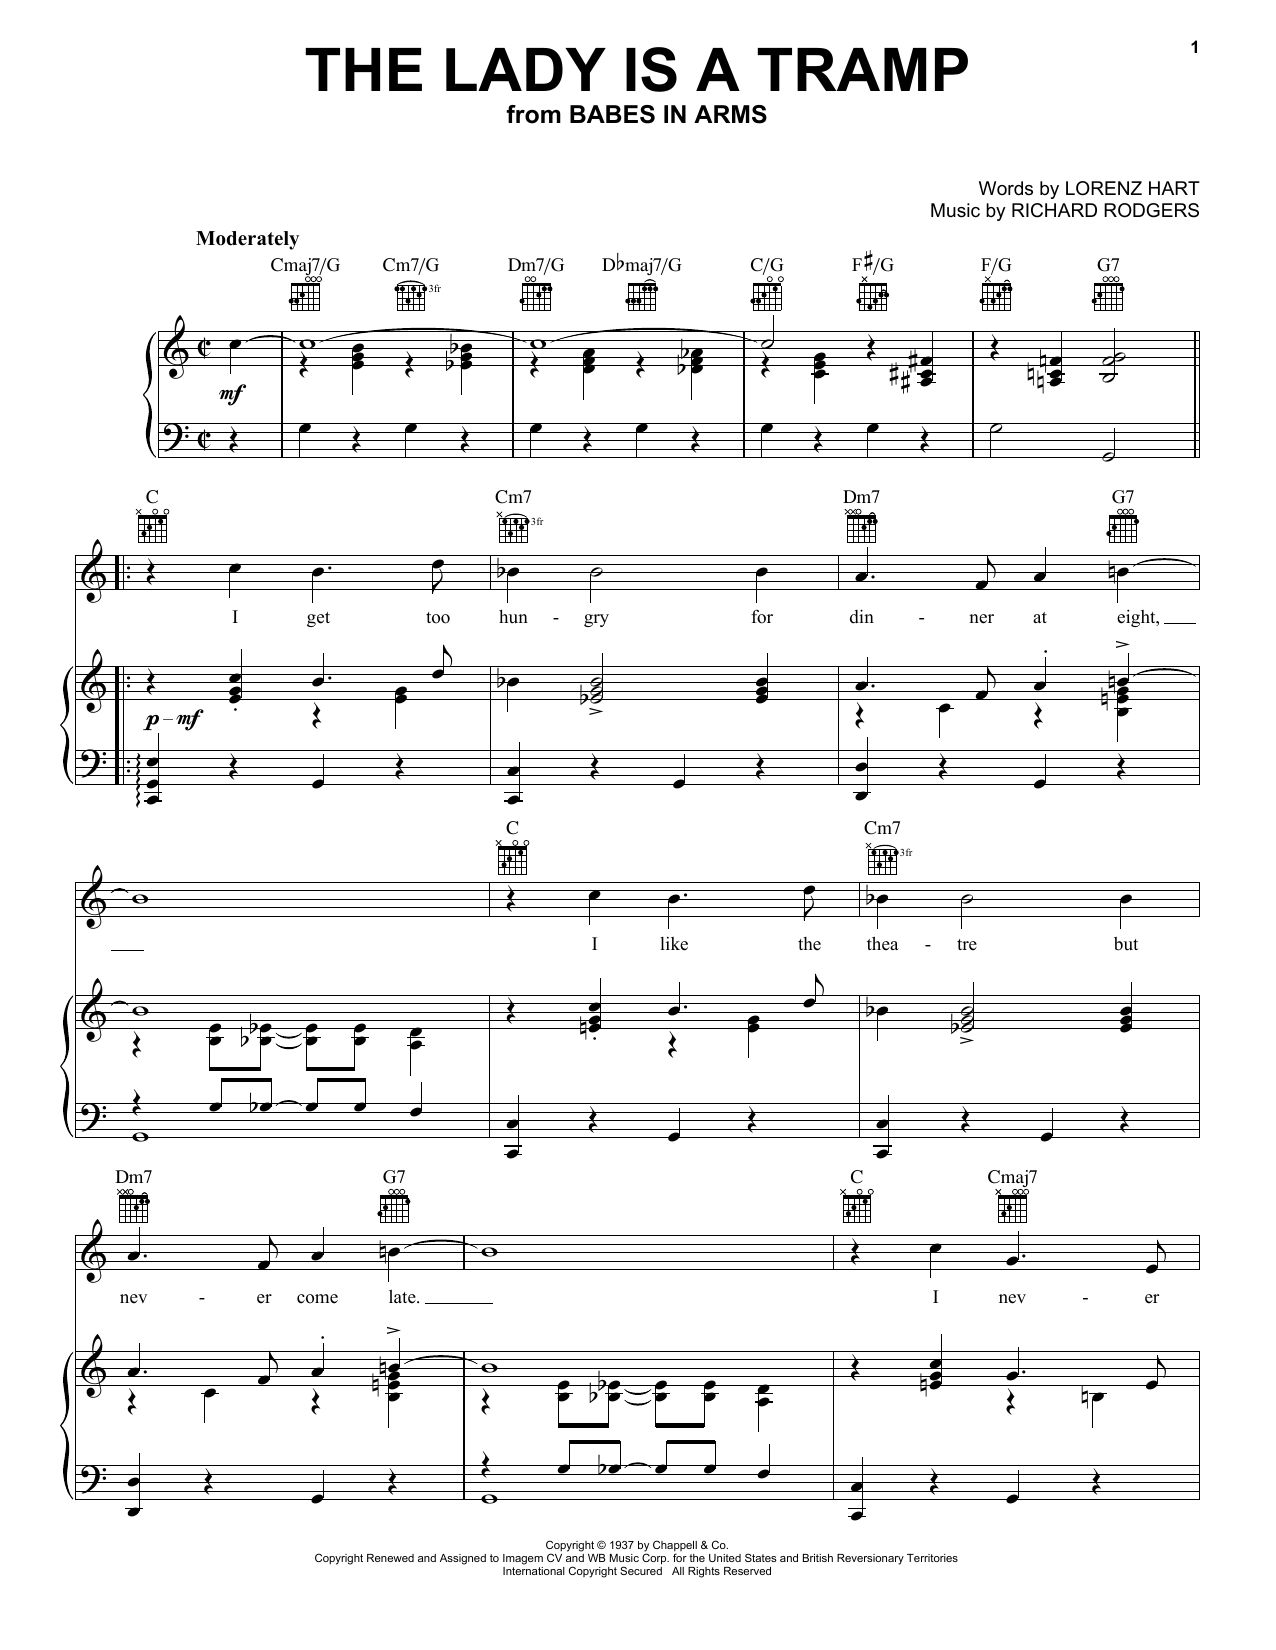 Frank Sinatra The Lady Is A Tramp sheet music notes and chords. Download Printable PDF.